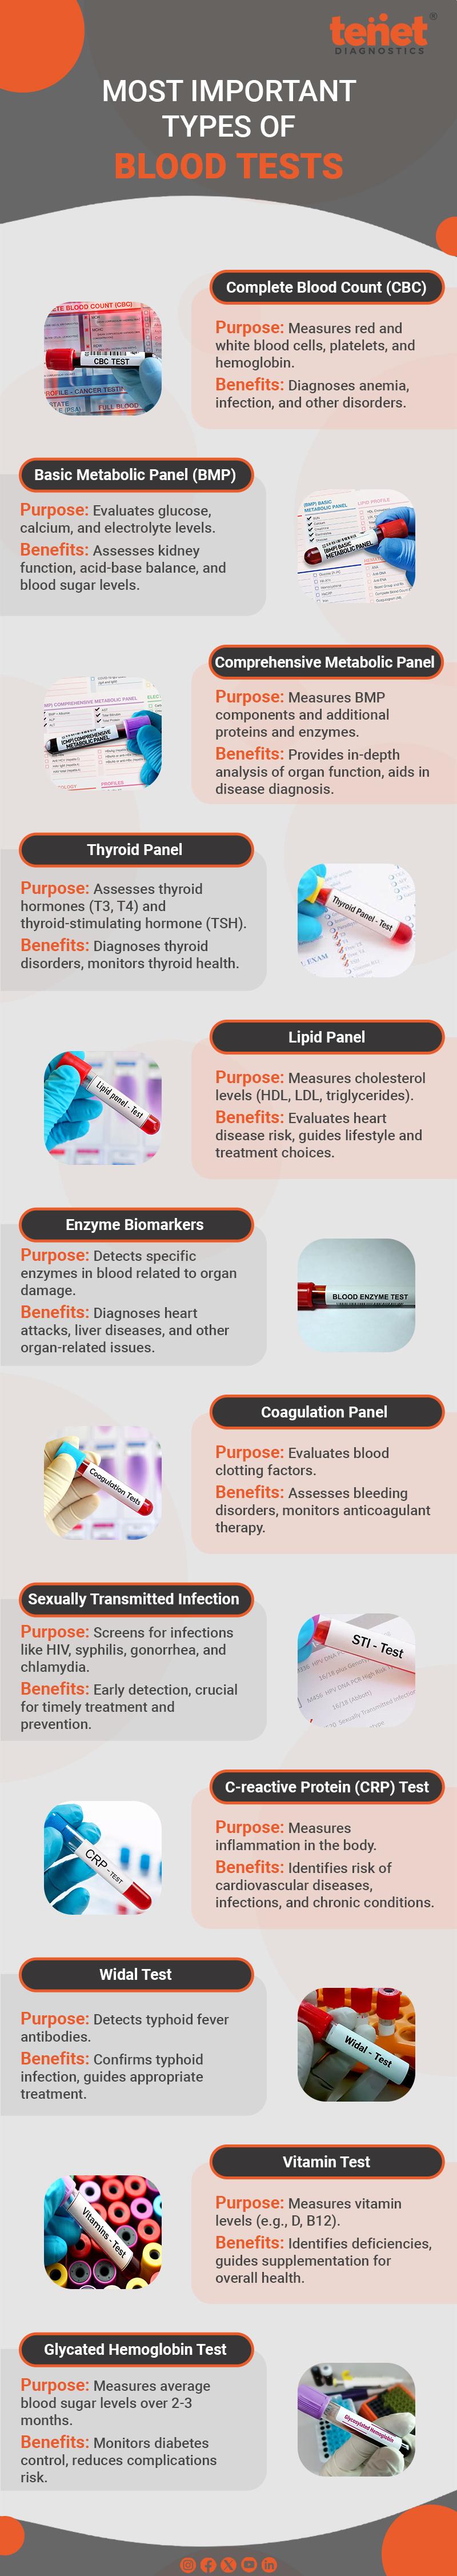 Important Types of Blood Tests